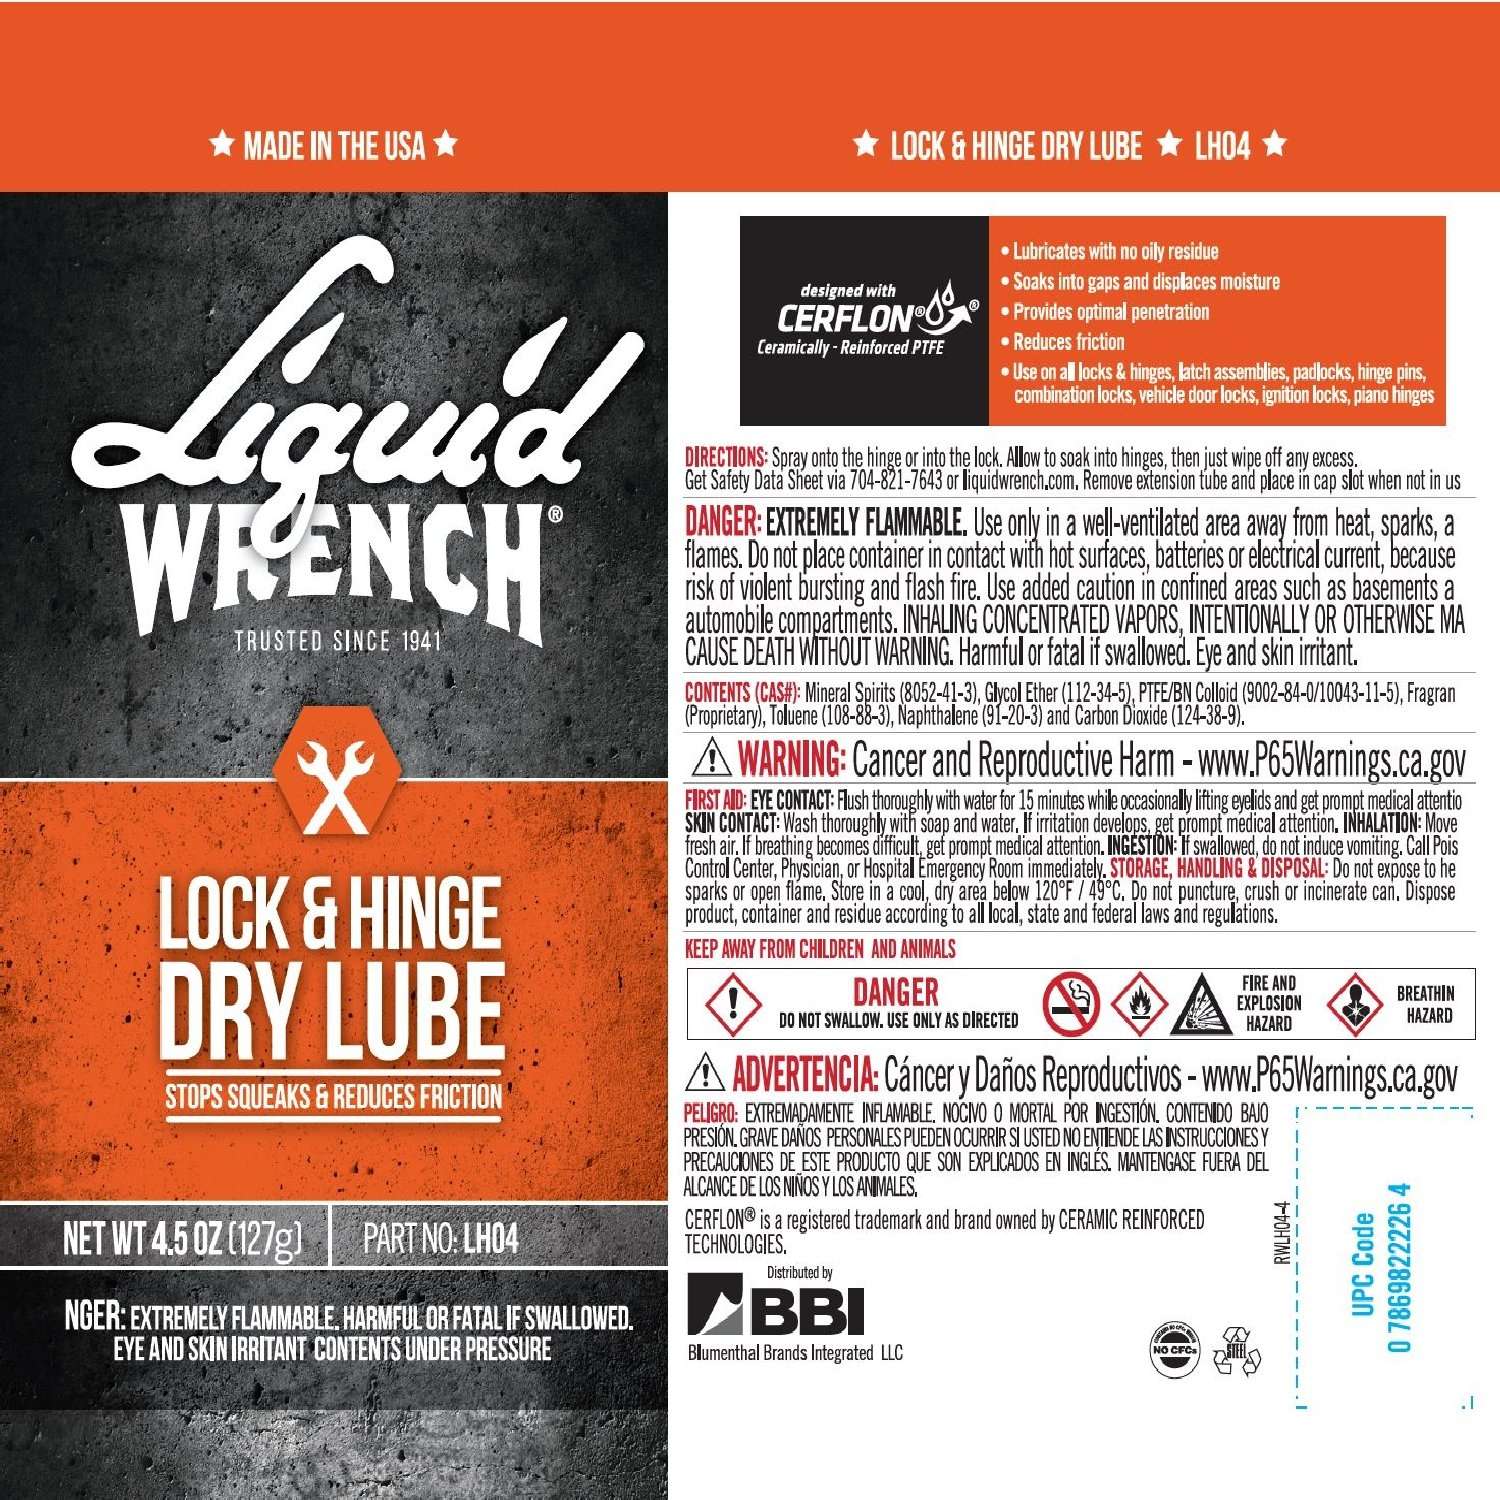 Liquid Wrench 12 oz. Penetrating Oil at Tractor Supply Co.